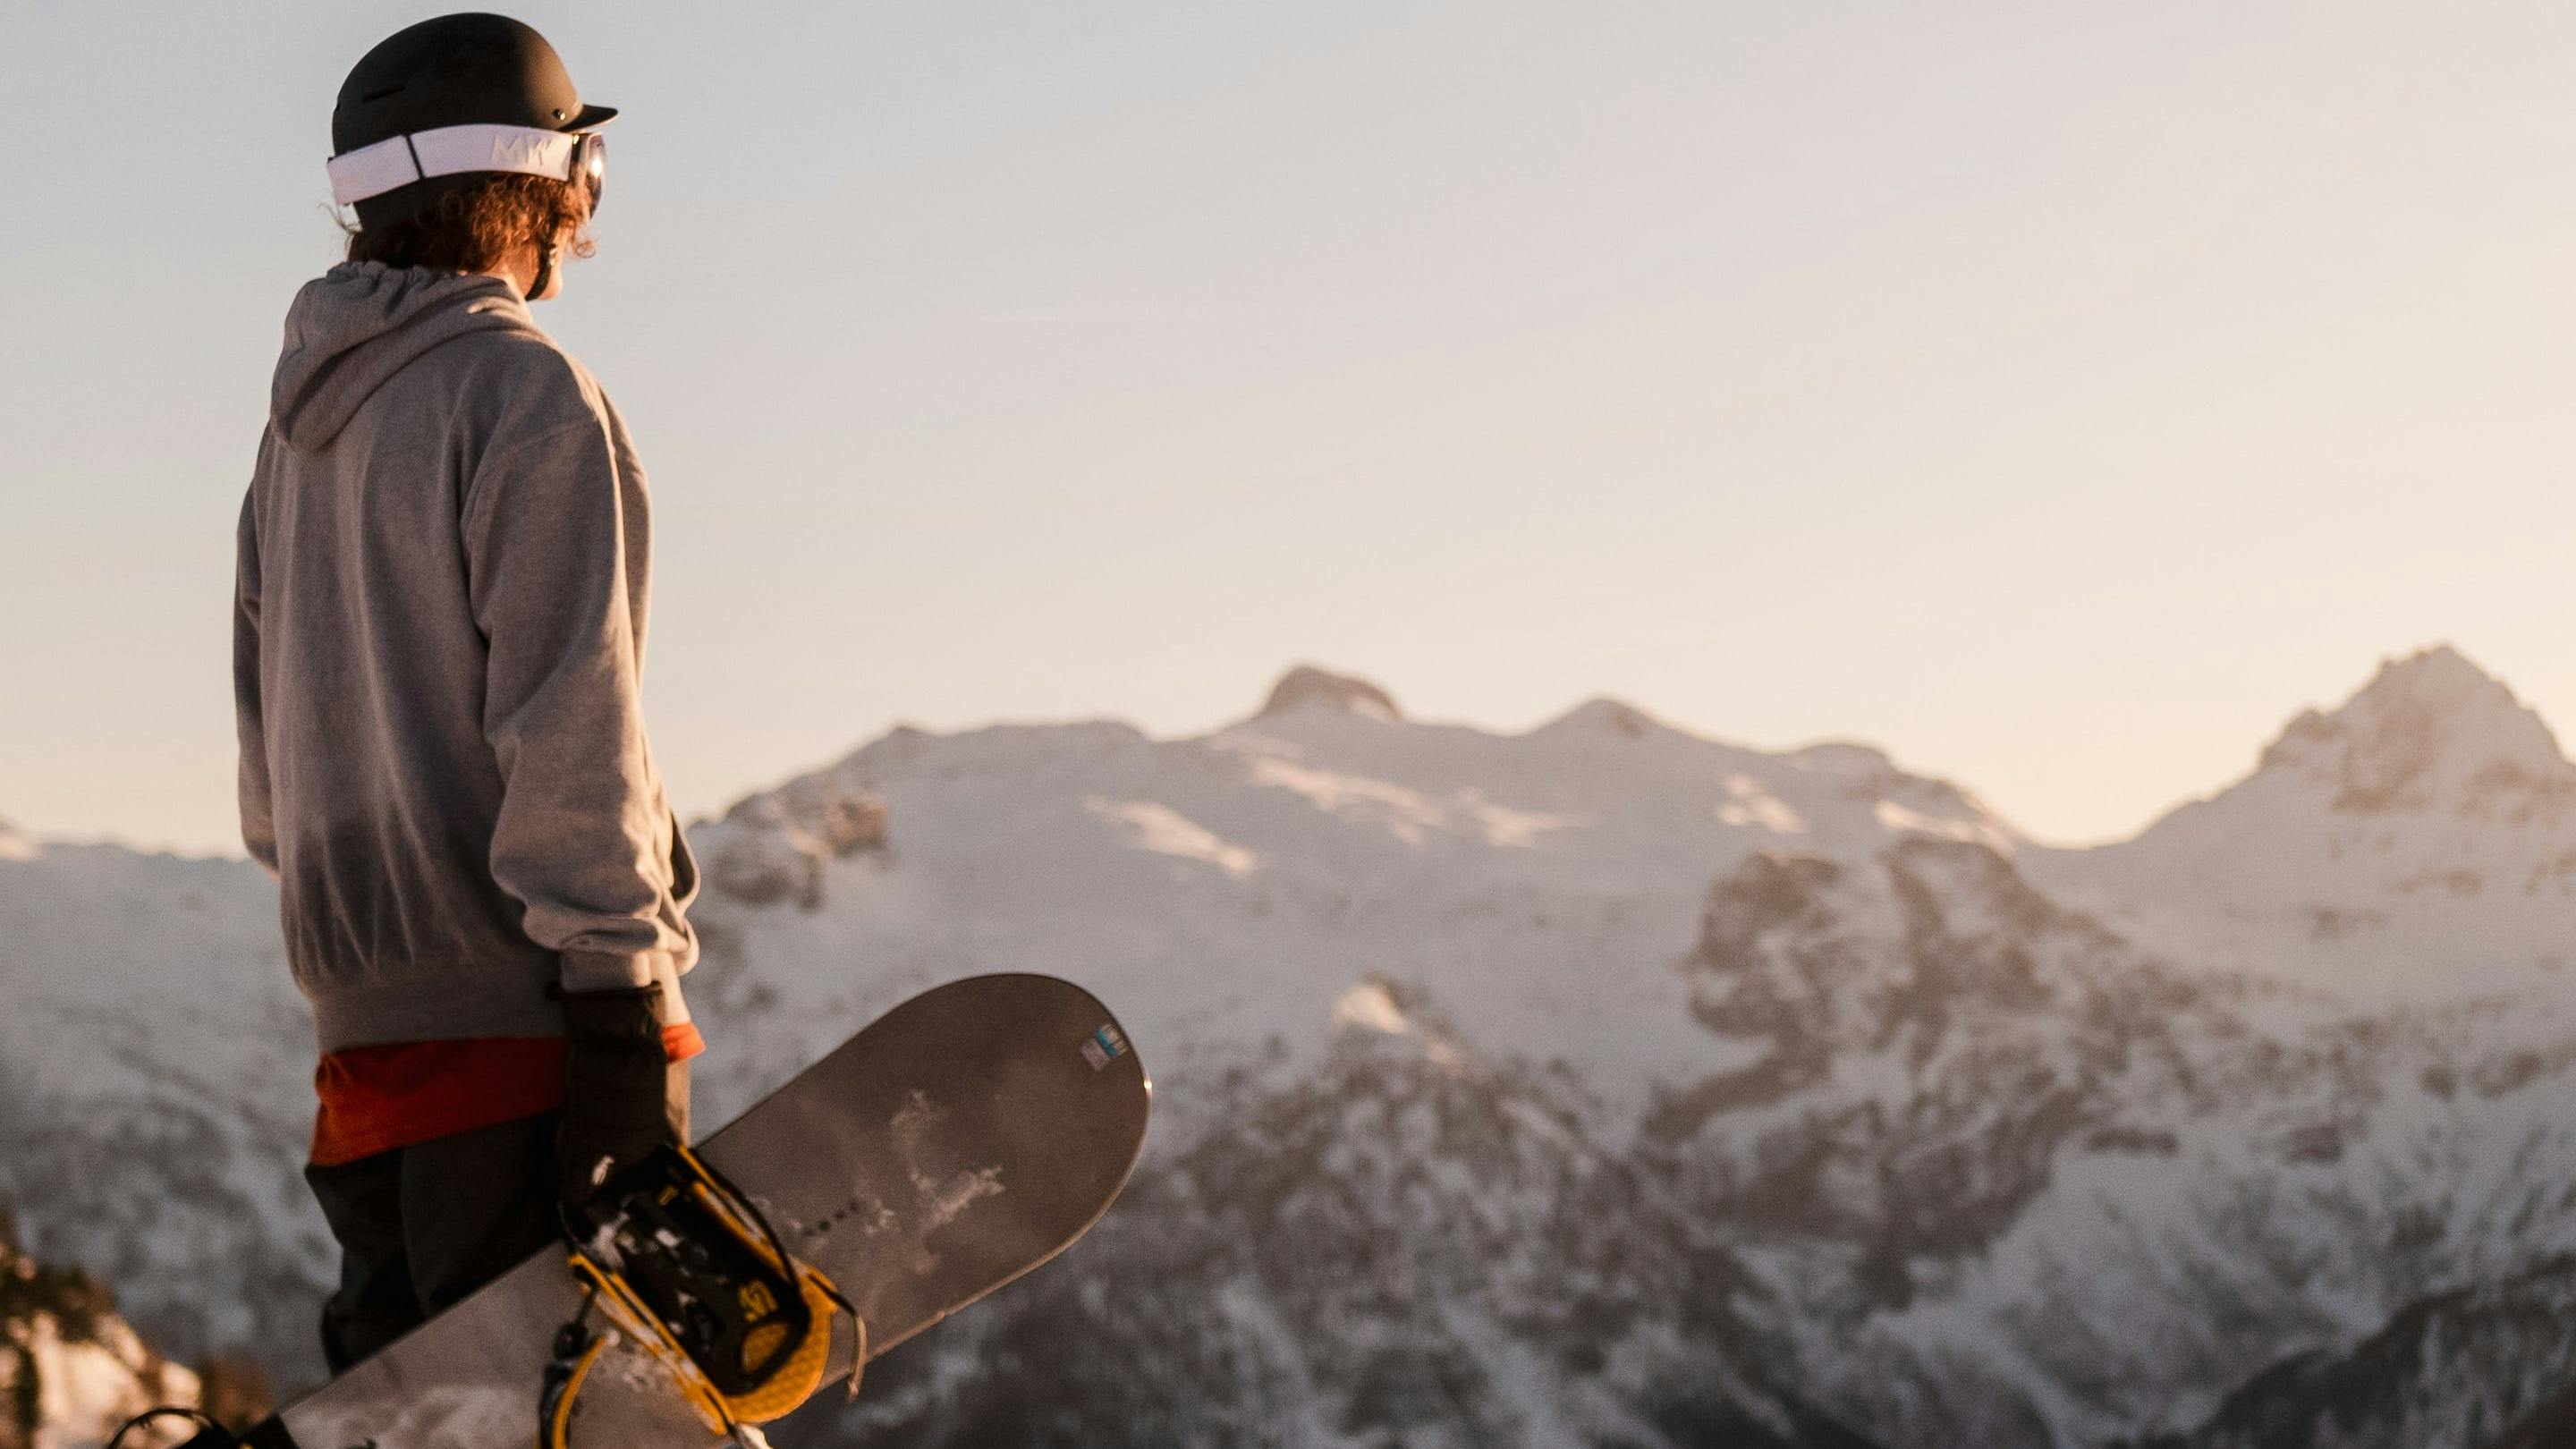 Snowboarder looking over a mountain range.